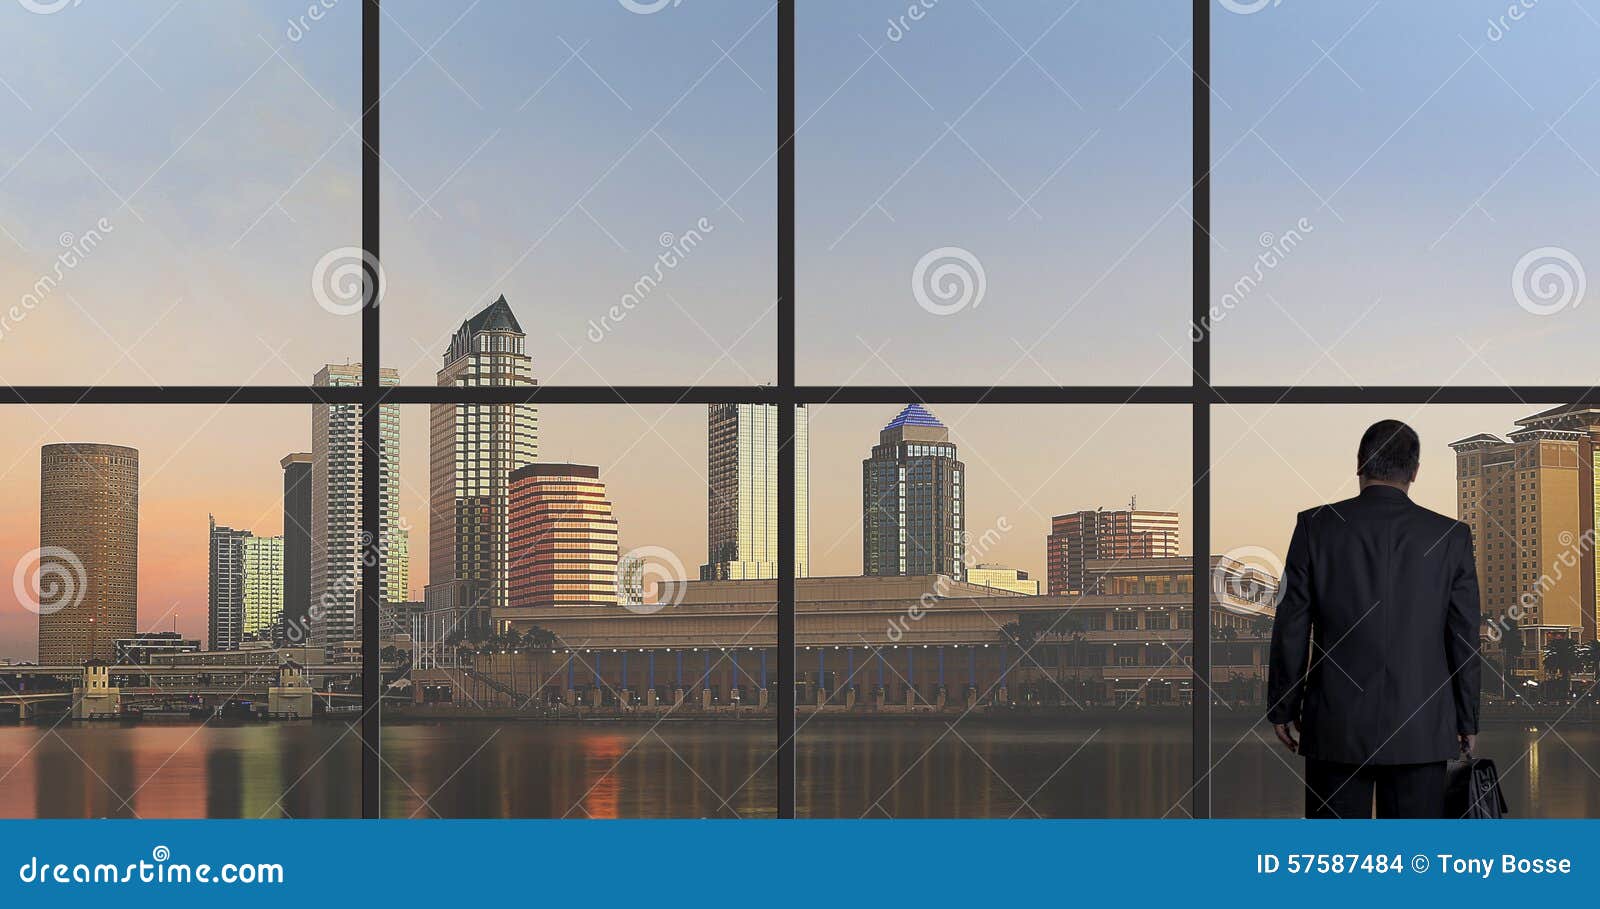 Free Images : thinking, reflection, corporate, professional, black,  interior design, businessman, executive, business man, looking out window,  window covering, human positions 2400x1595 - - 599556 - Free stock photos -  PxHere